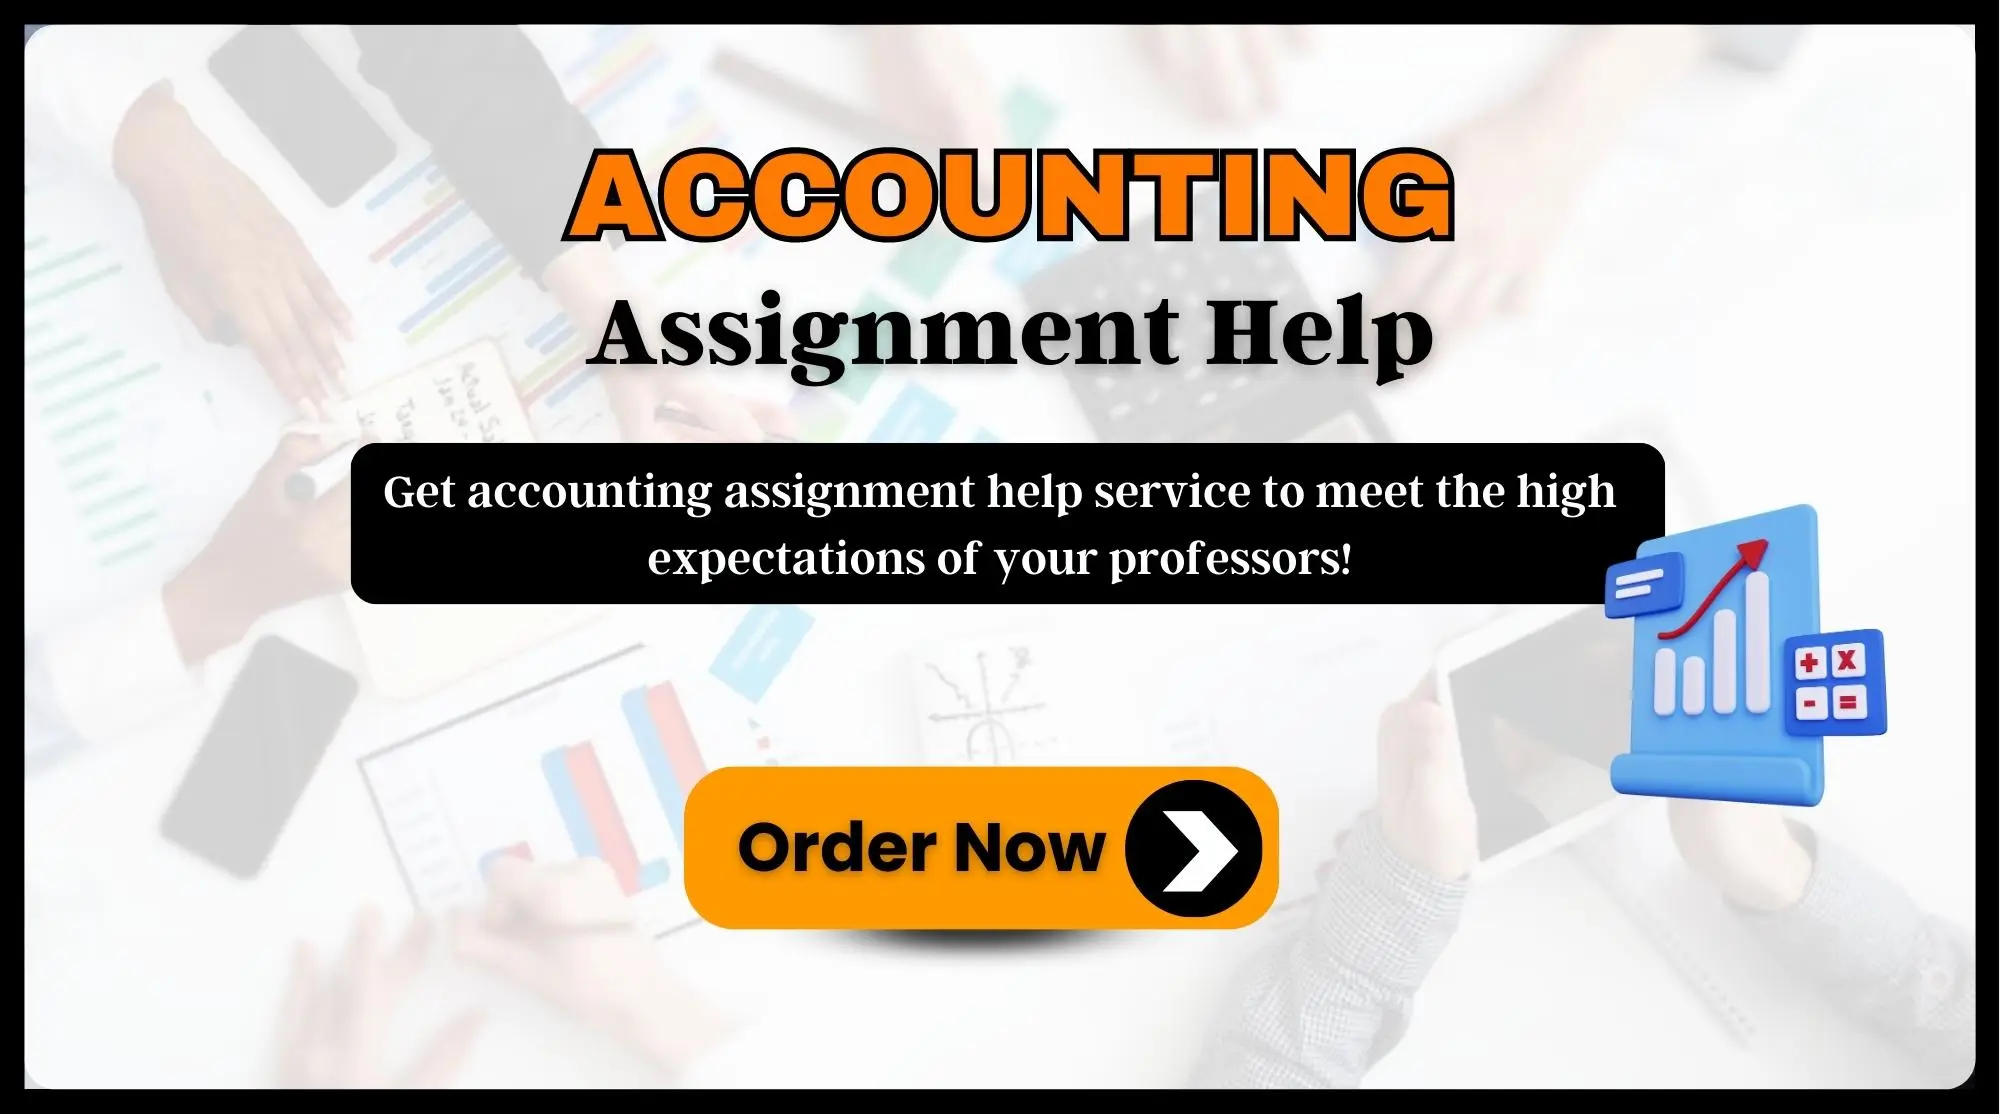 Accounting Assignment Help - Get Good Grades